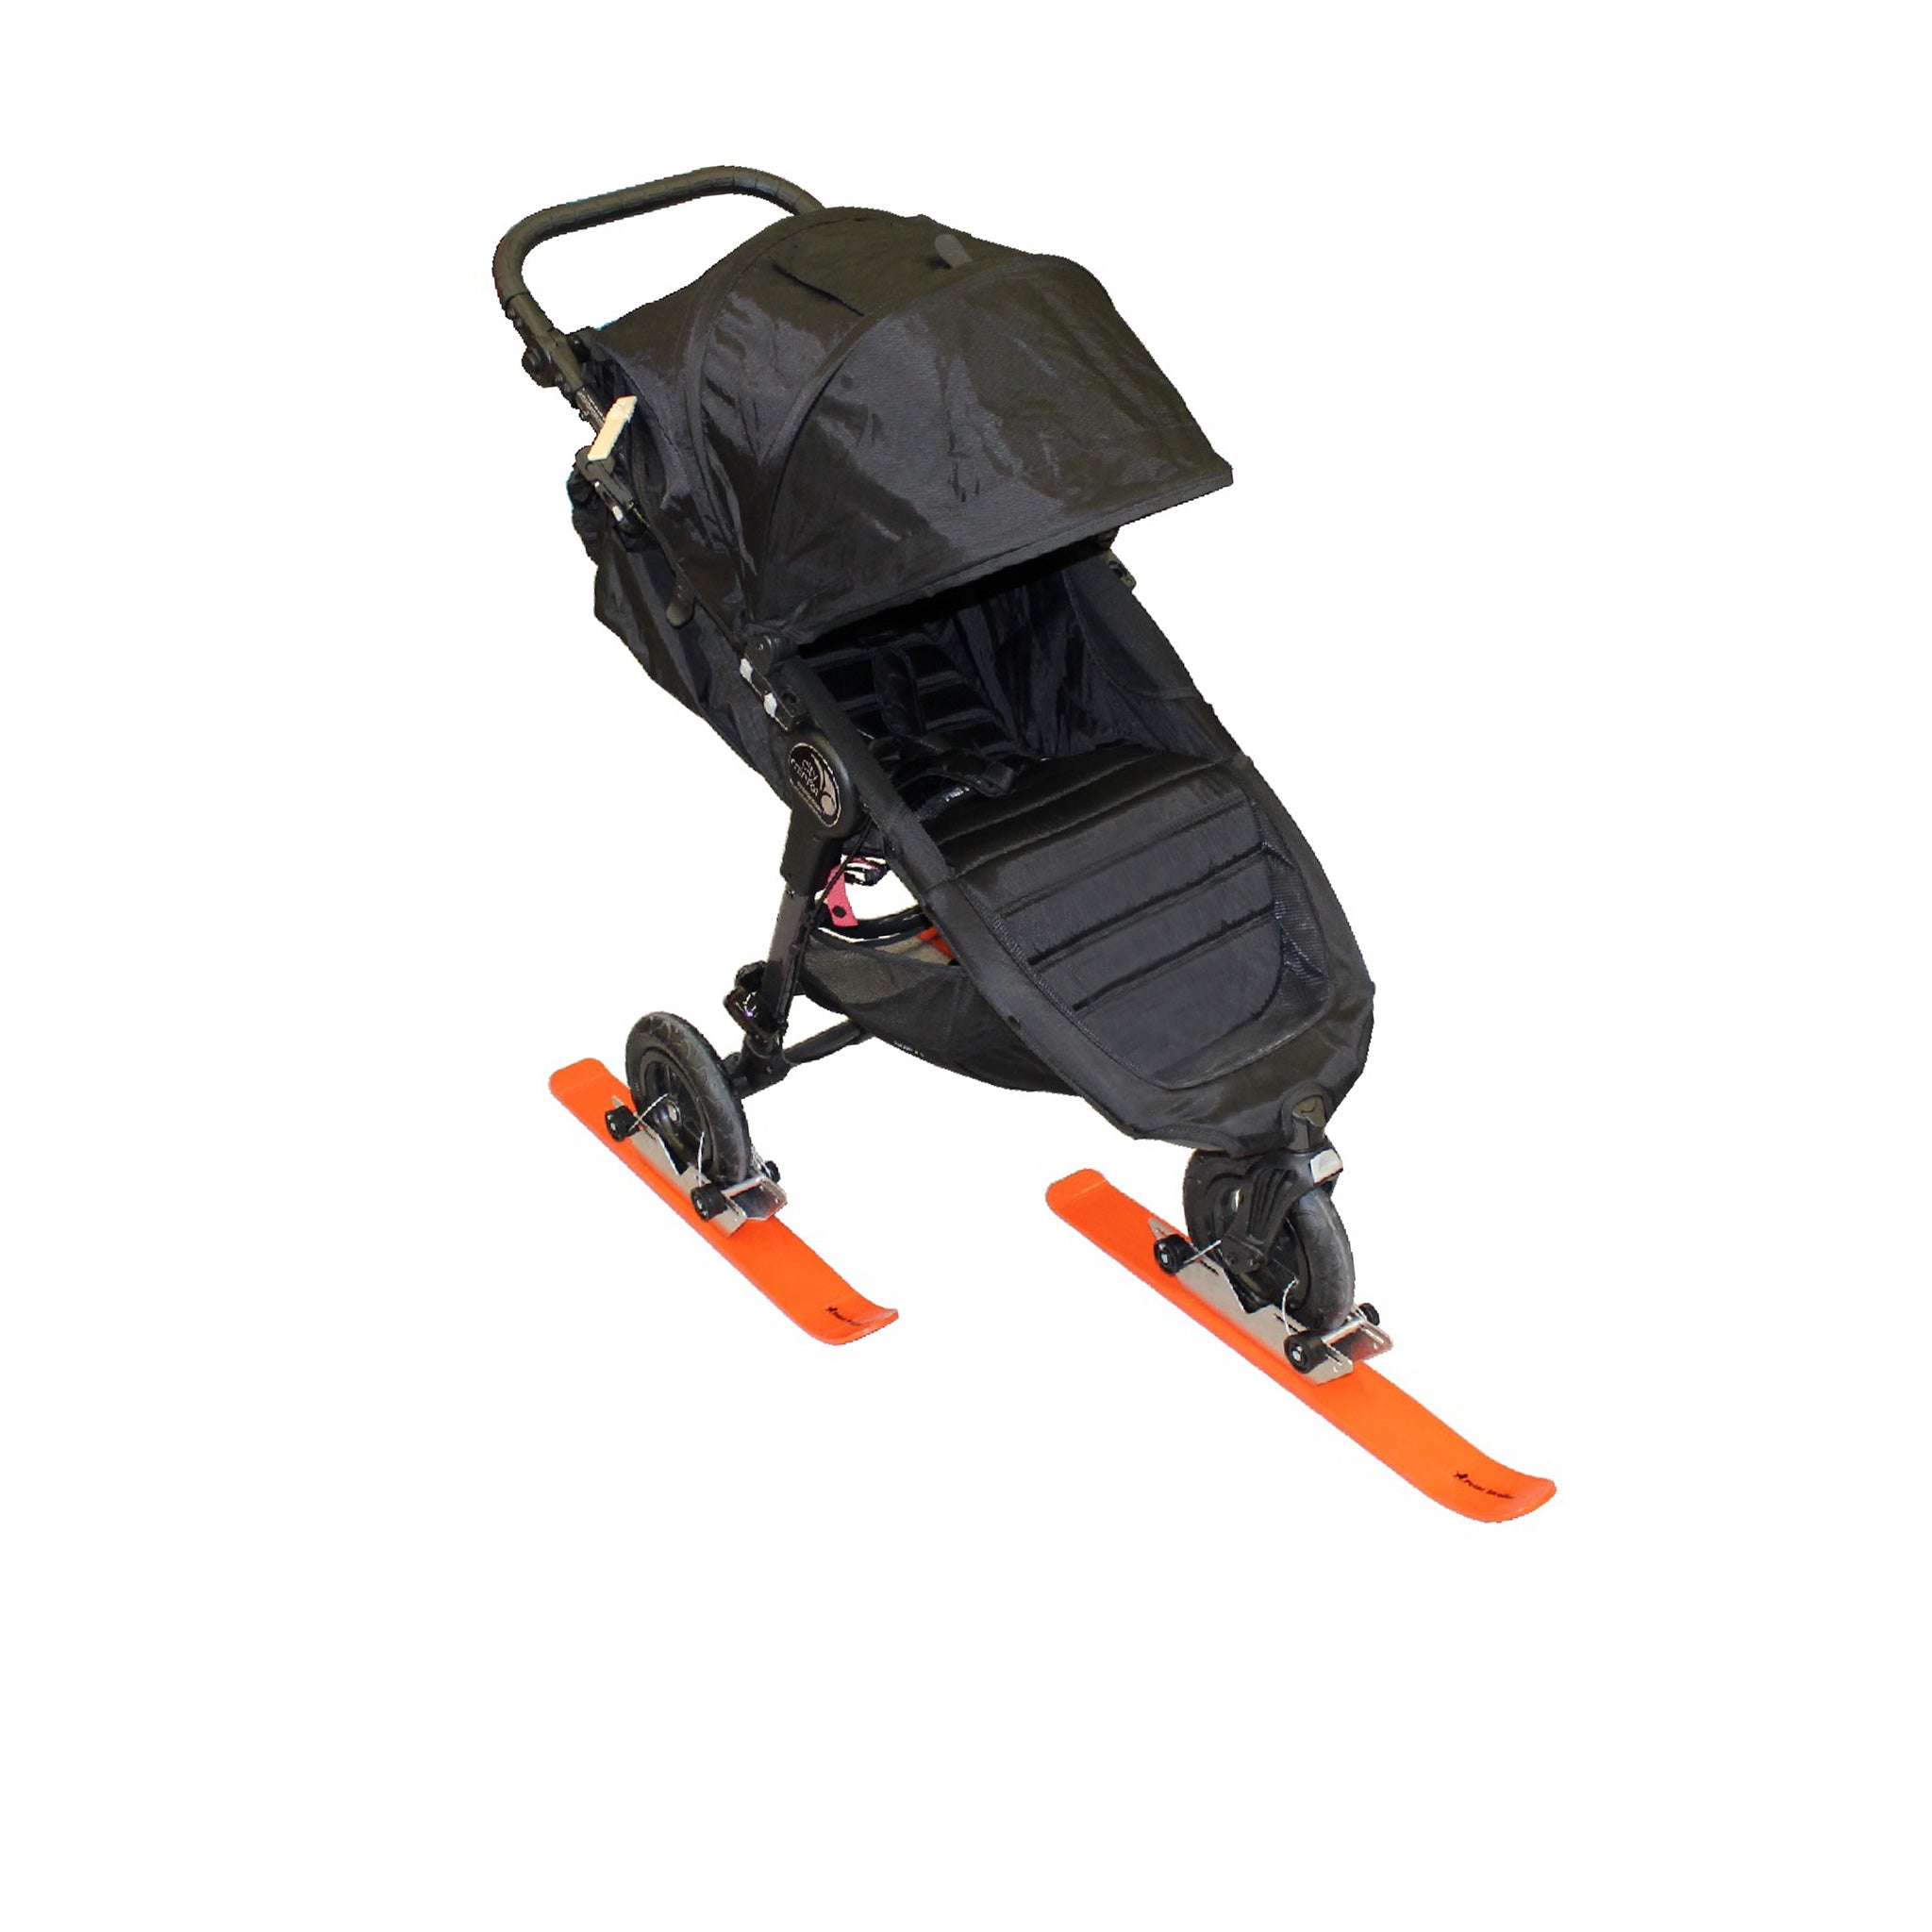 Baby Stroller Skis by PremierSki: Upgrade Your Stroller for Winter Fun